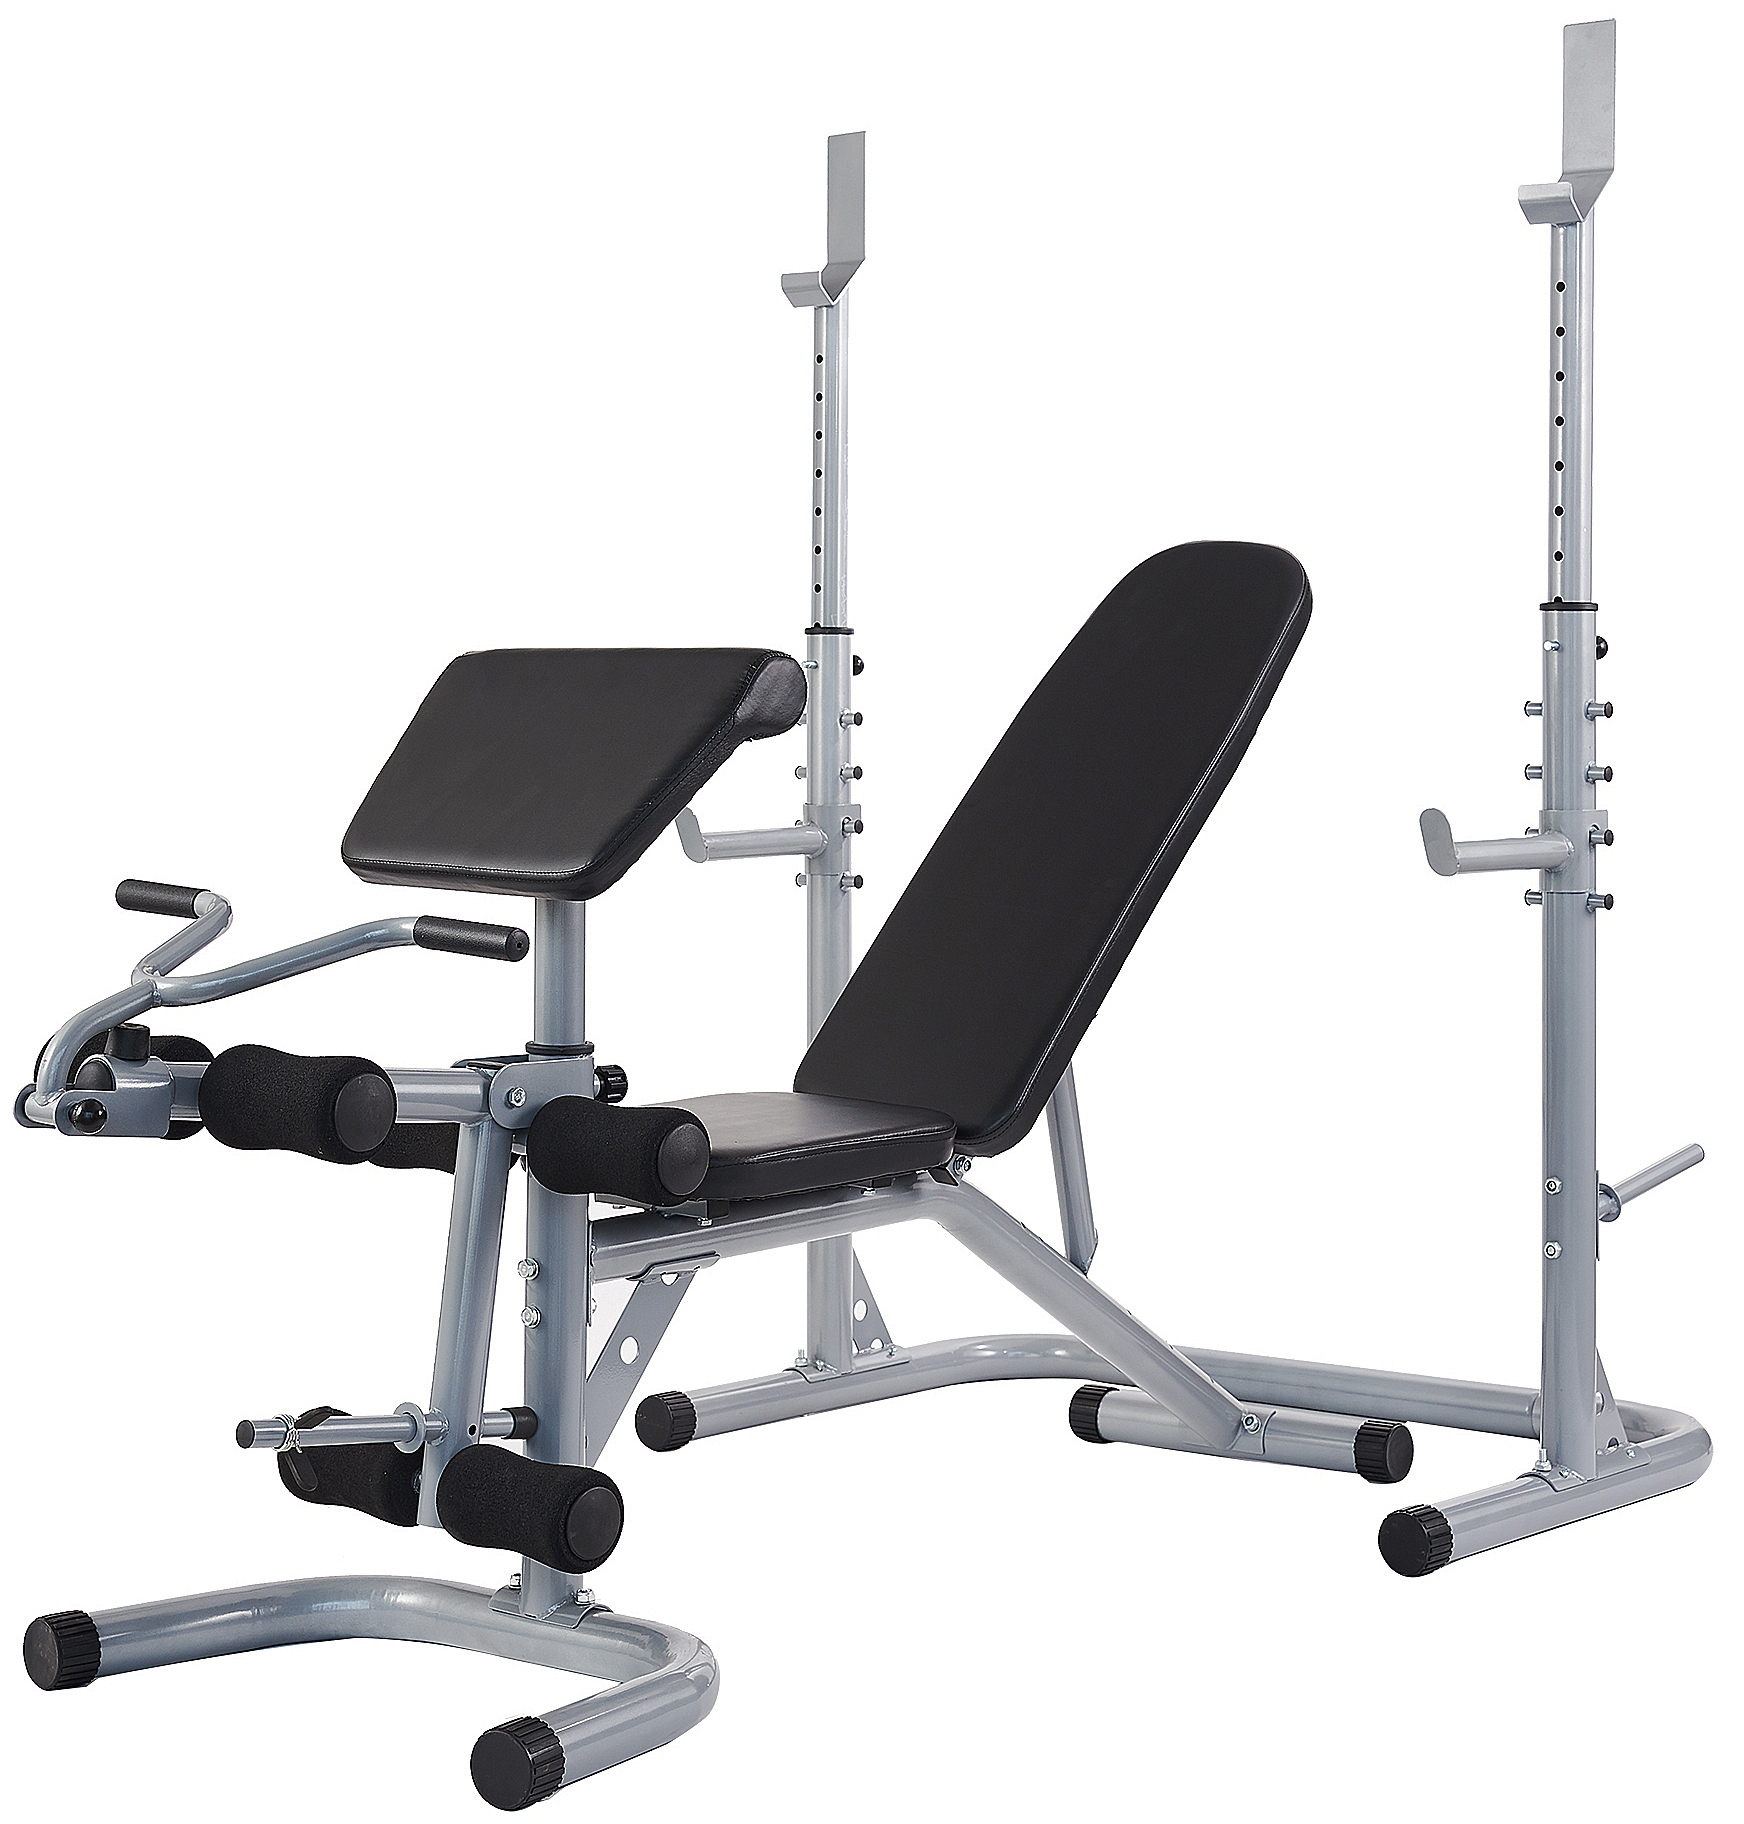 Everyday Essentials Multifunctional Workout Station Adjustable Olympic Workout Bench with Squat Rack, Leg Extension, Preacher Curl, and Weight Storage - image 1 of 6